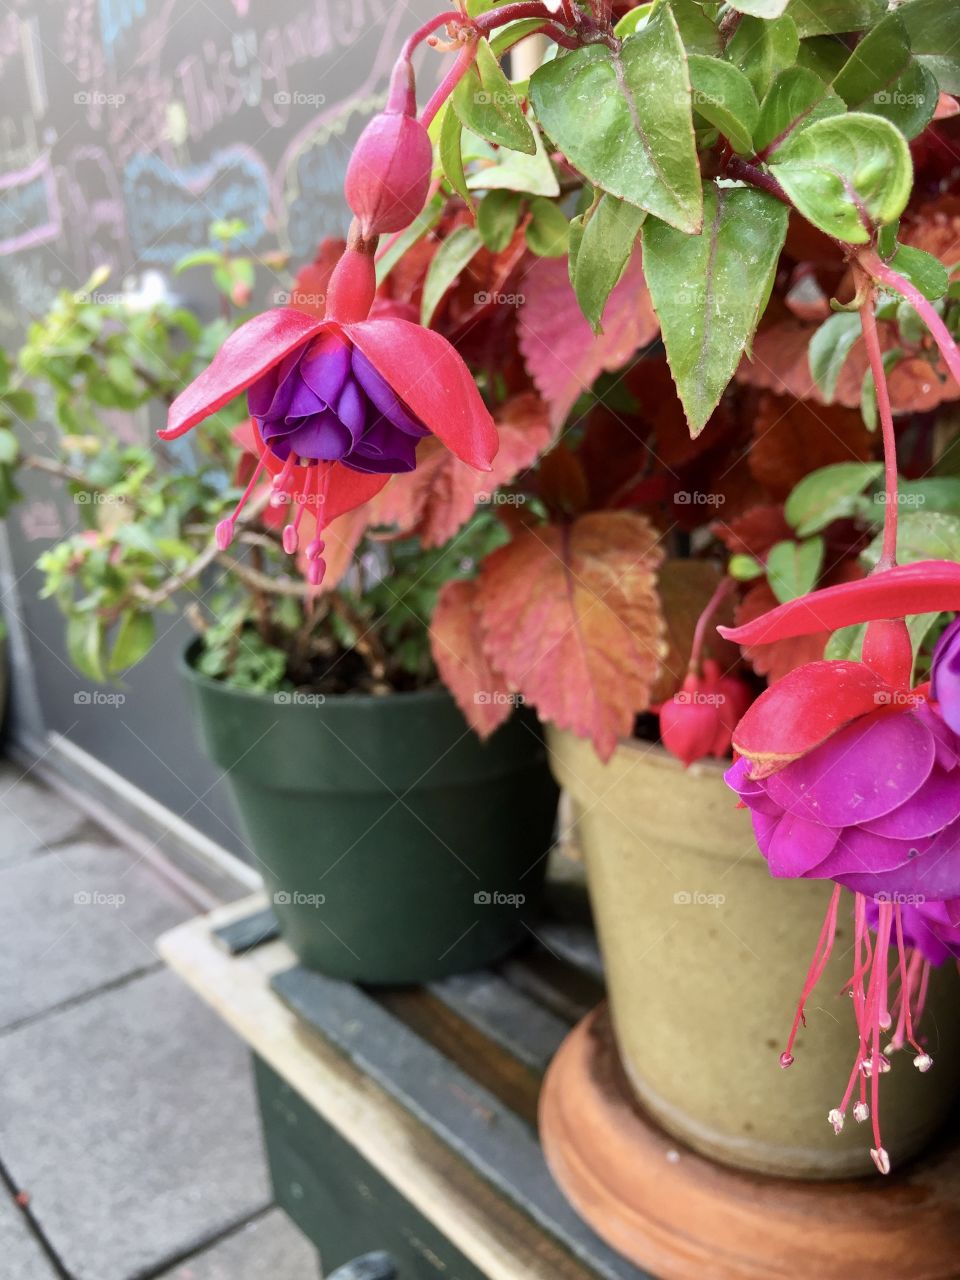 Potted flowers on a rooftop garden in Seattle